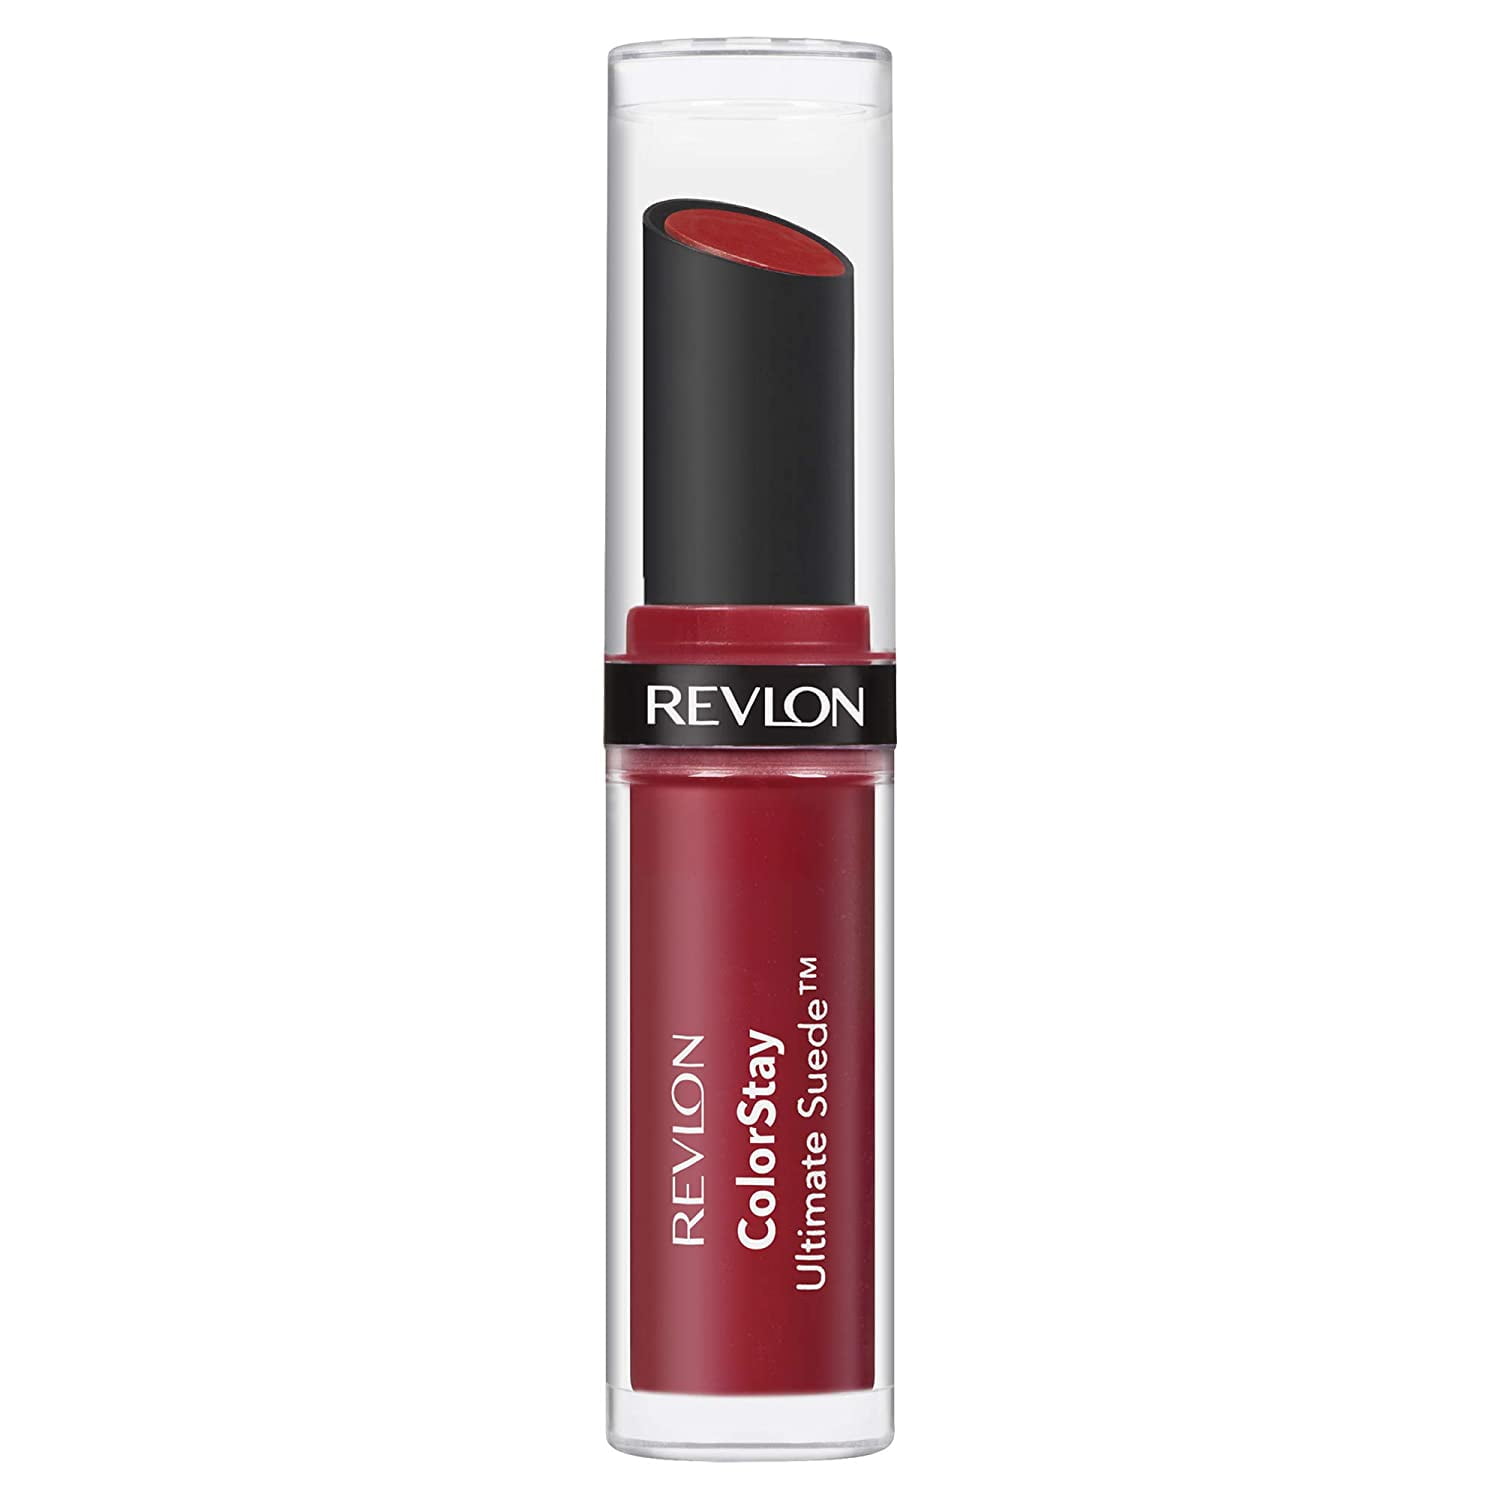 Revlon ColorStay Ultimate Suede Lipstick, Longwear Soft, Ultra-Hydrating High-Impact Lip Color, Formulated with Vitamin E, 002 Ingenue, 0.048 oz